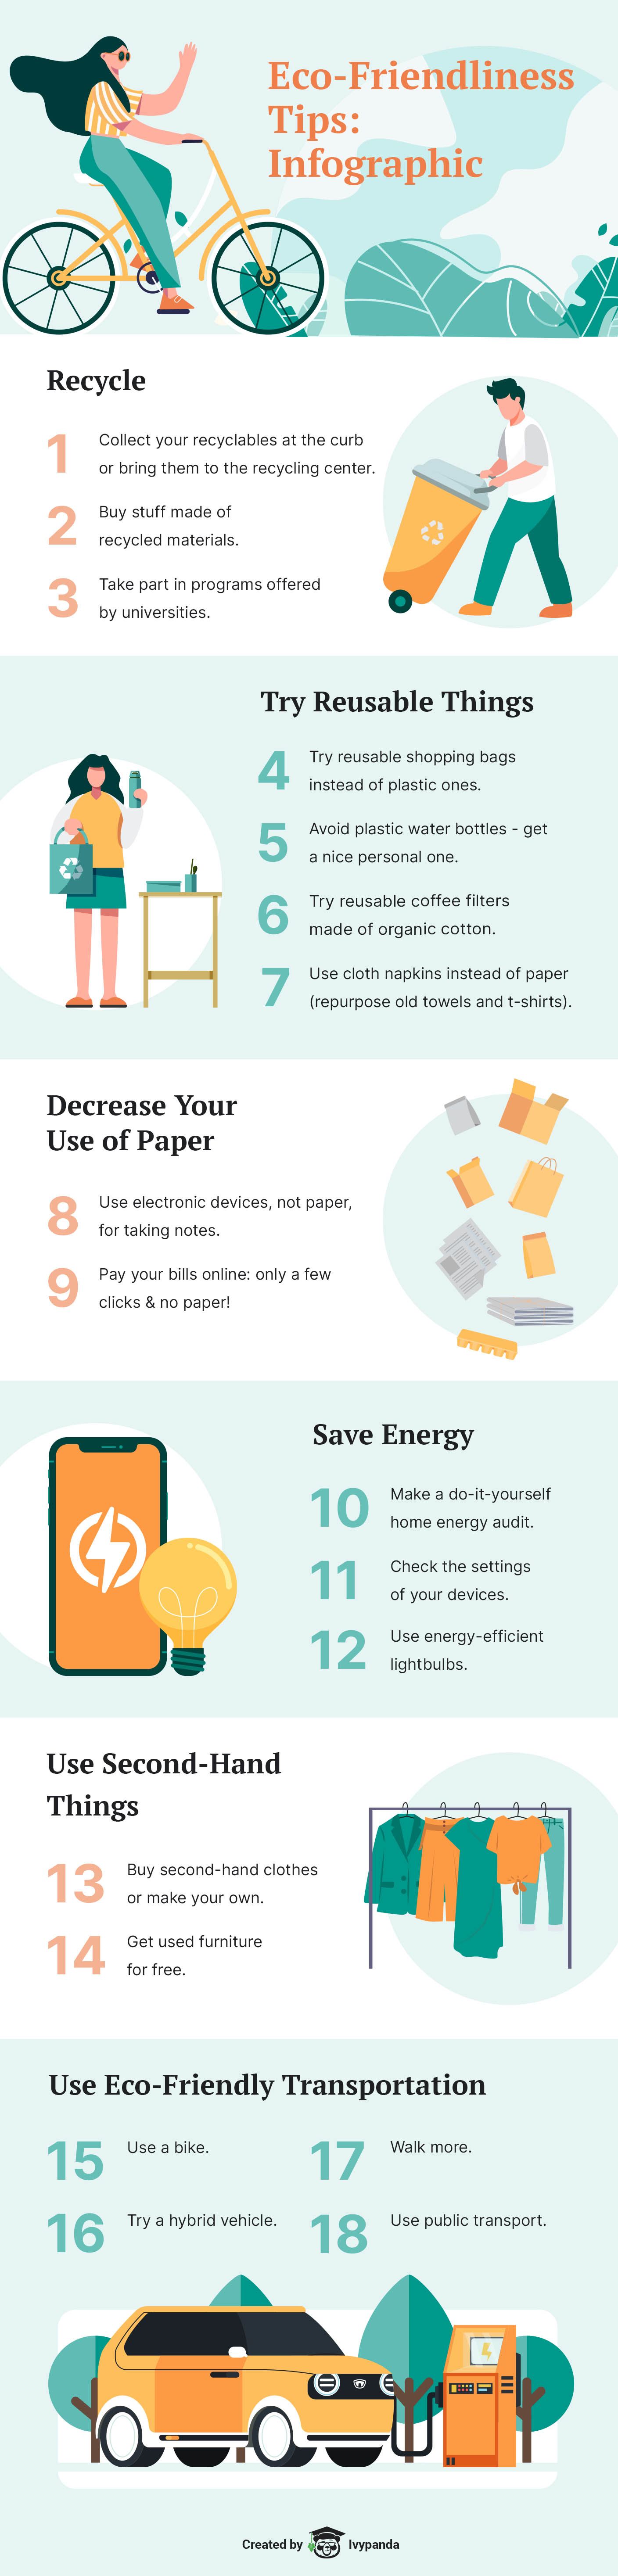 18 Green Tips for Students - Infographic